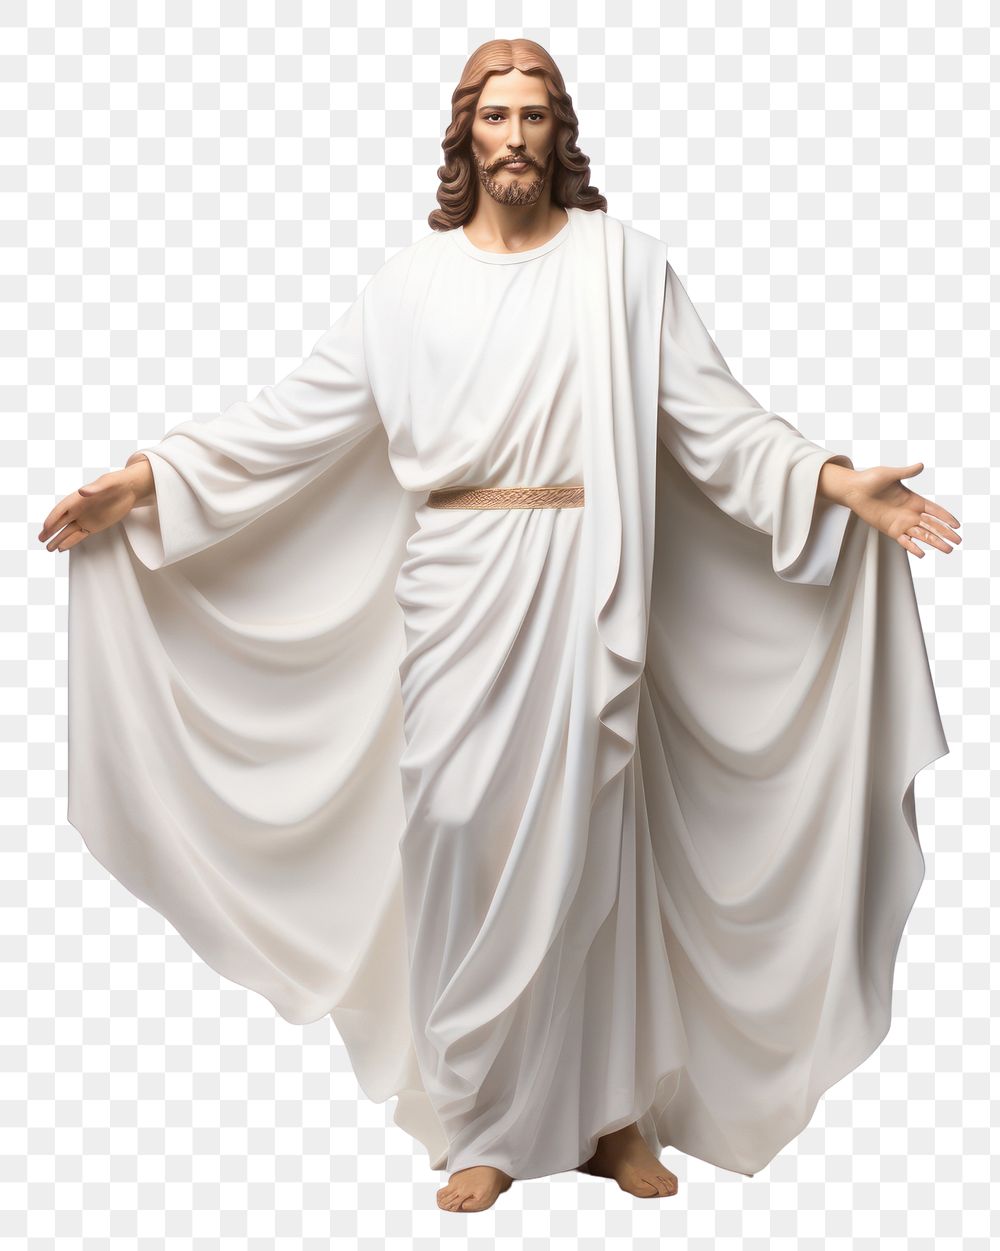 Jesus Christ PNG Images | Free Photos, PNG Stickers, Wallpapers ...